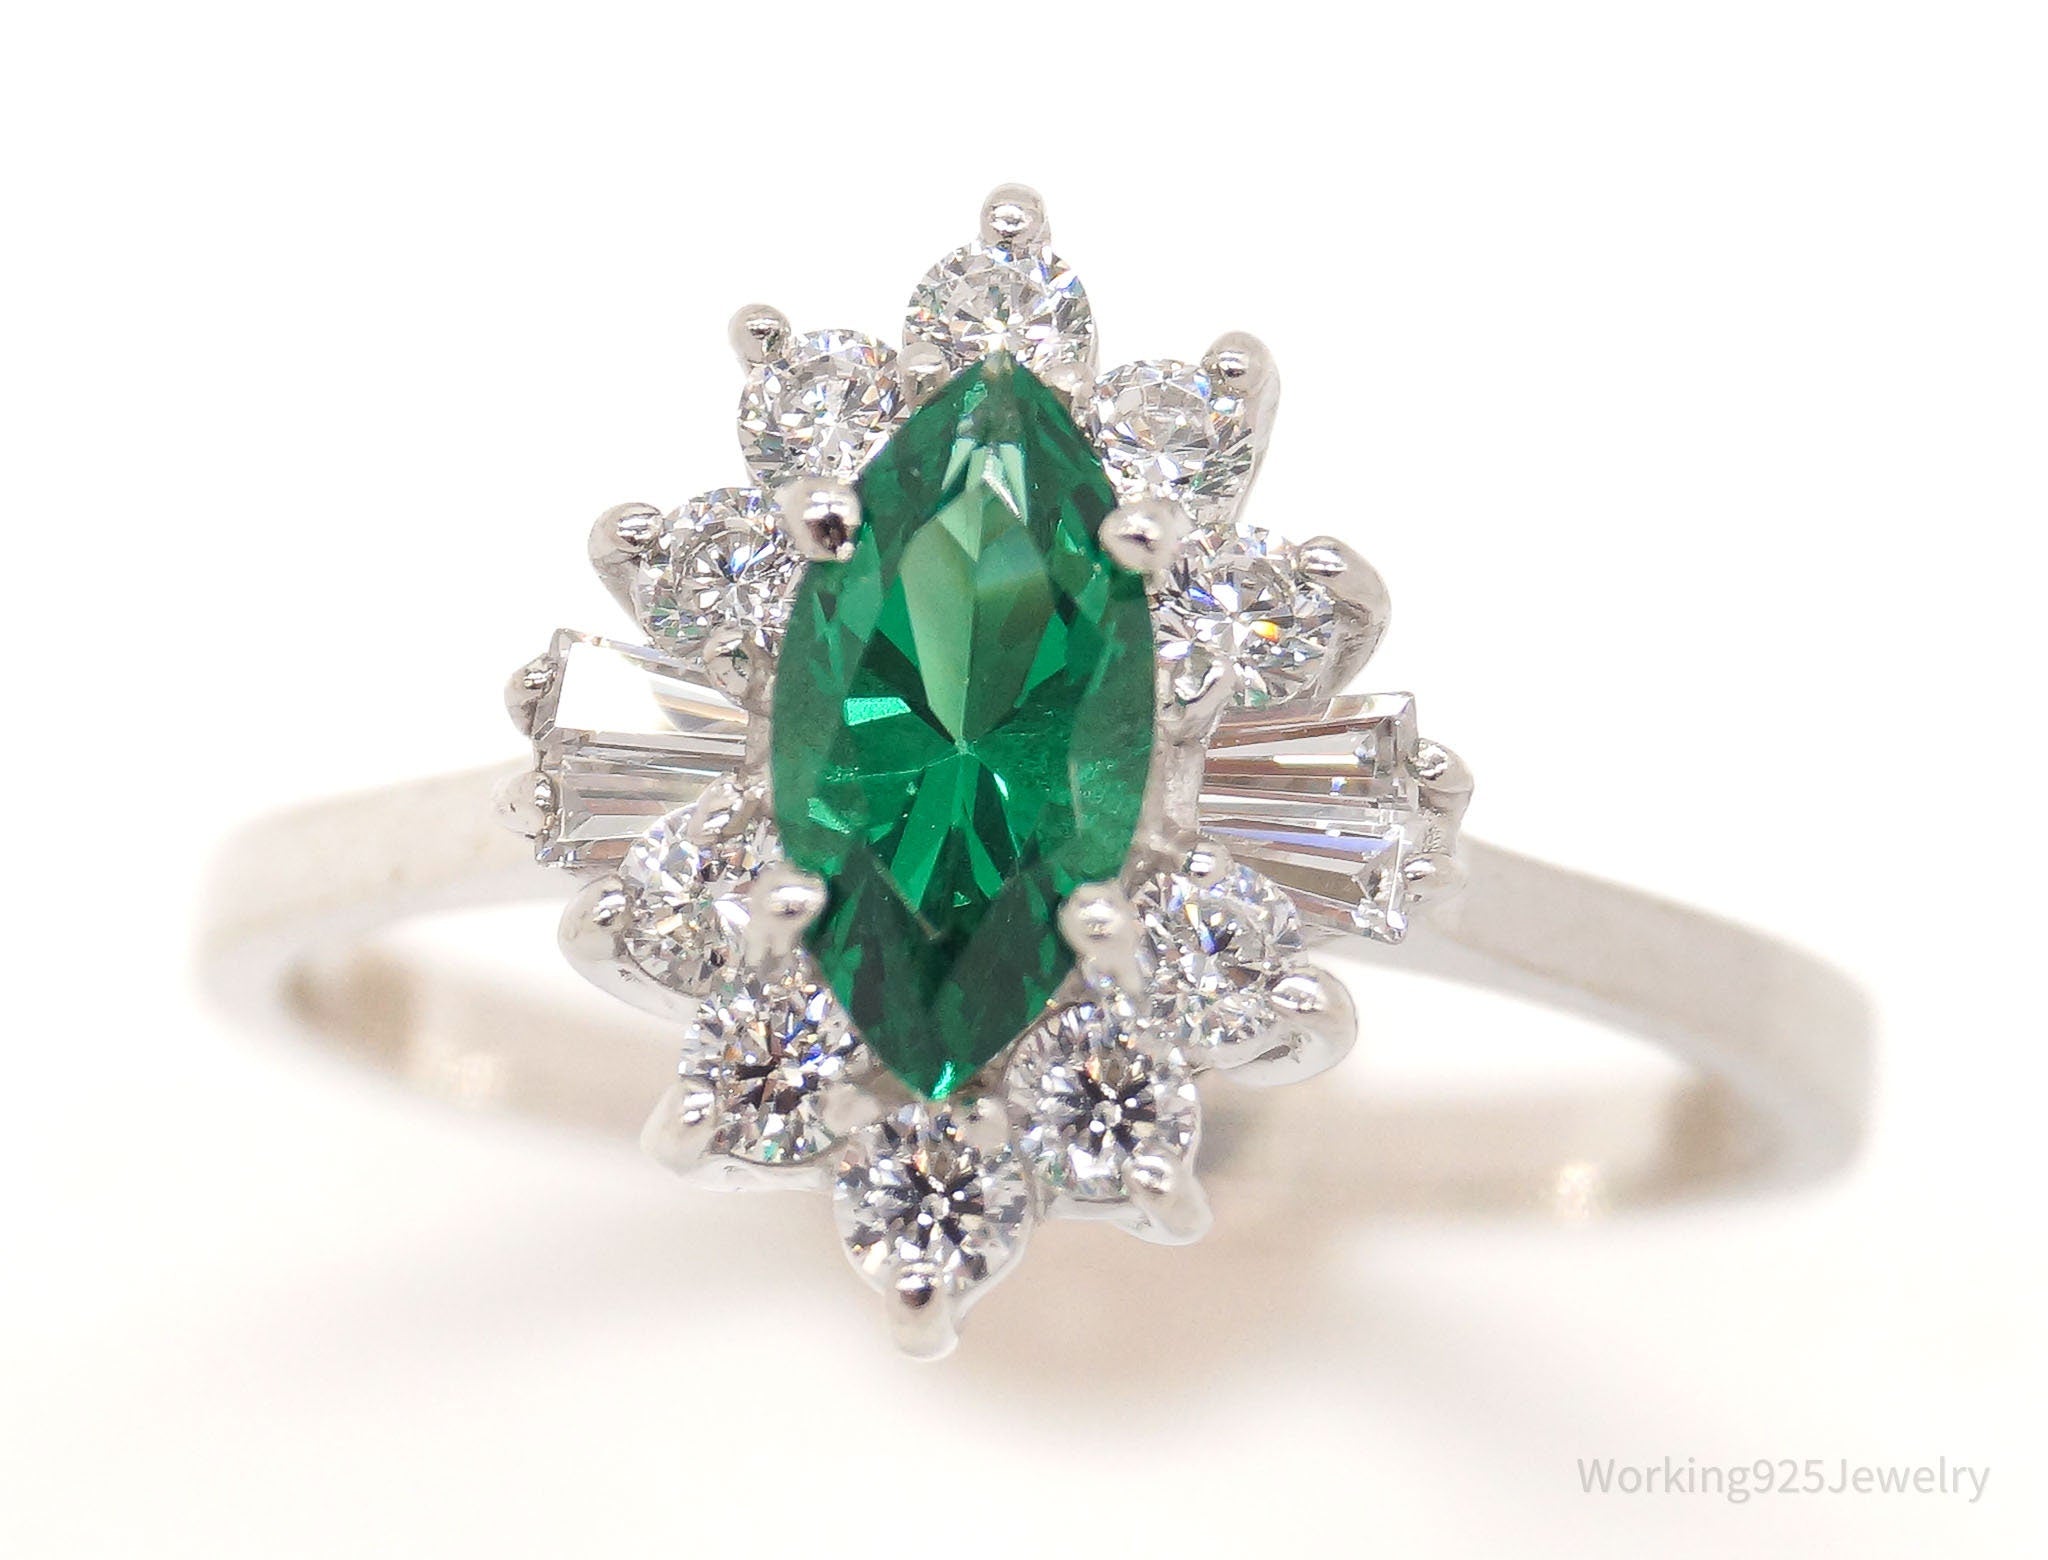 Vintage Lab Emerald Cubic Zirconia Sterling Silver Ring - Size 6.75